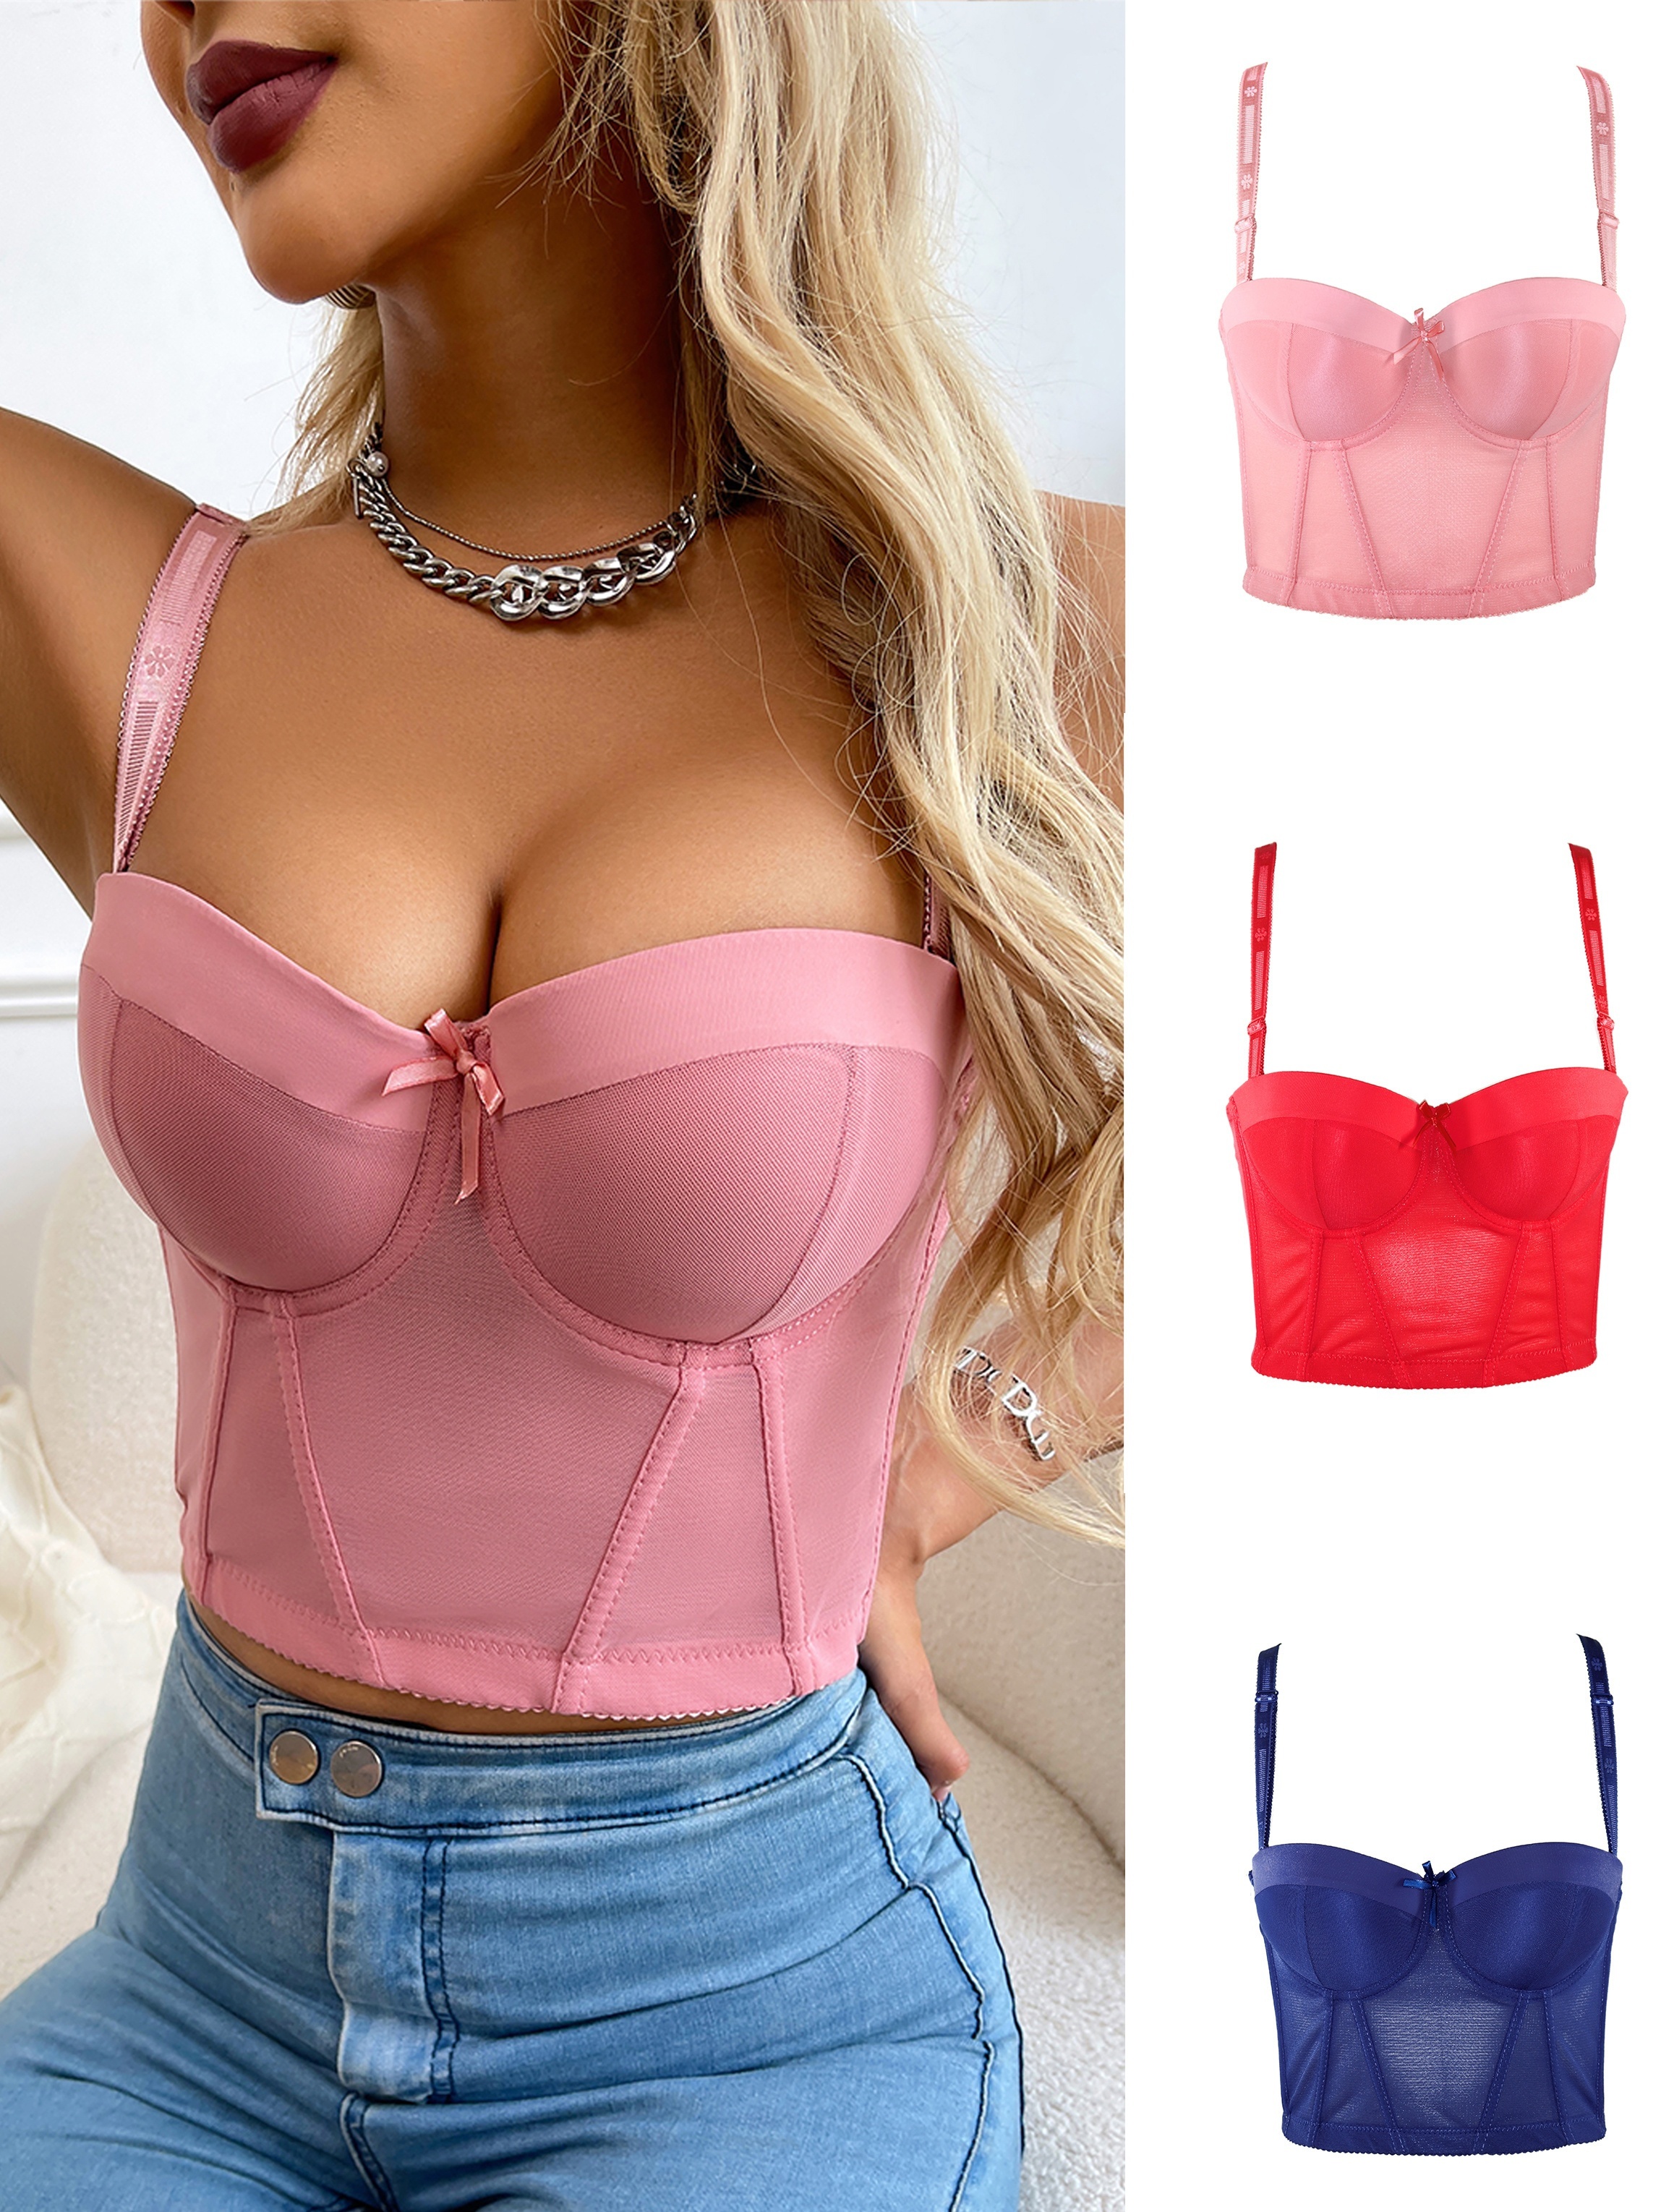 Backless Bra Invisible Bralette Lace Wedding Bras Low Back Underwear Push Up  Brassiere Women Seamless Lingerie Sexy Corset Bh